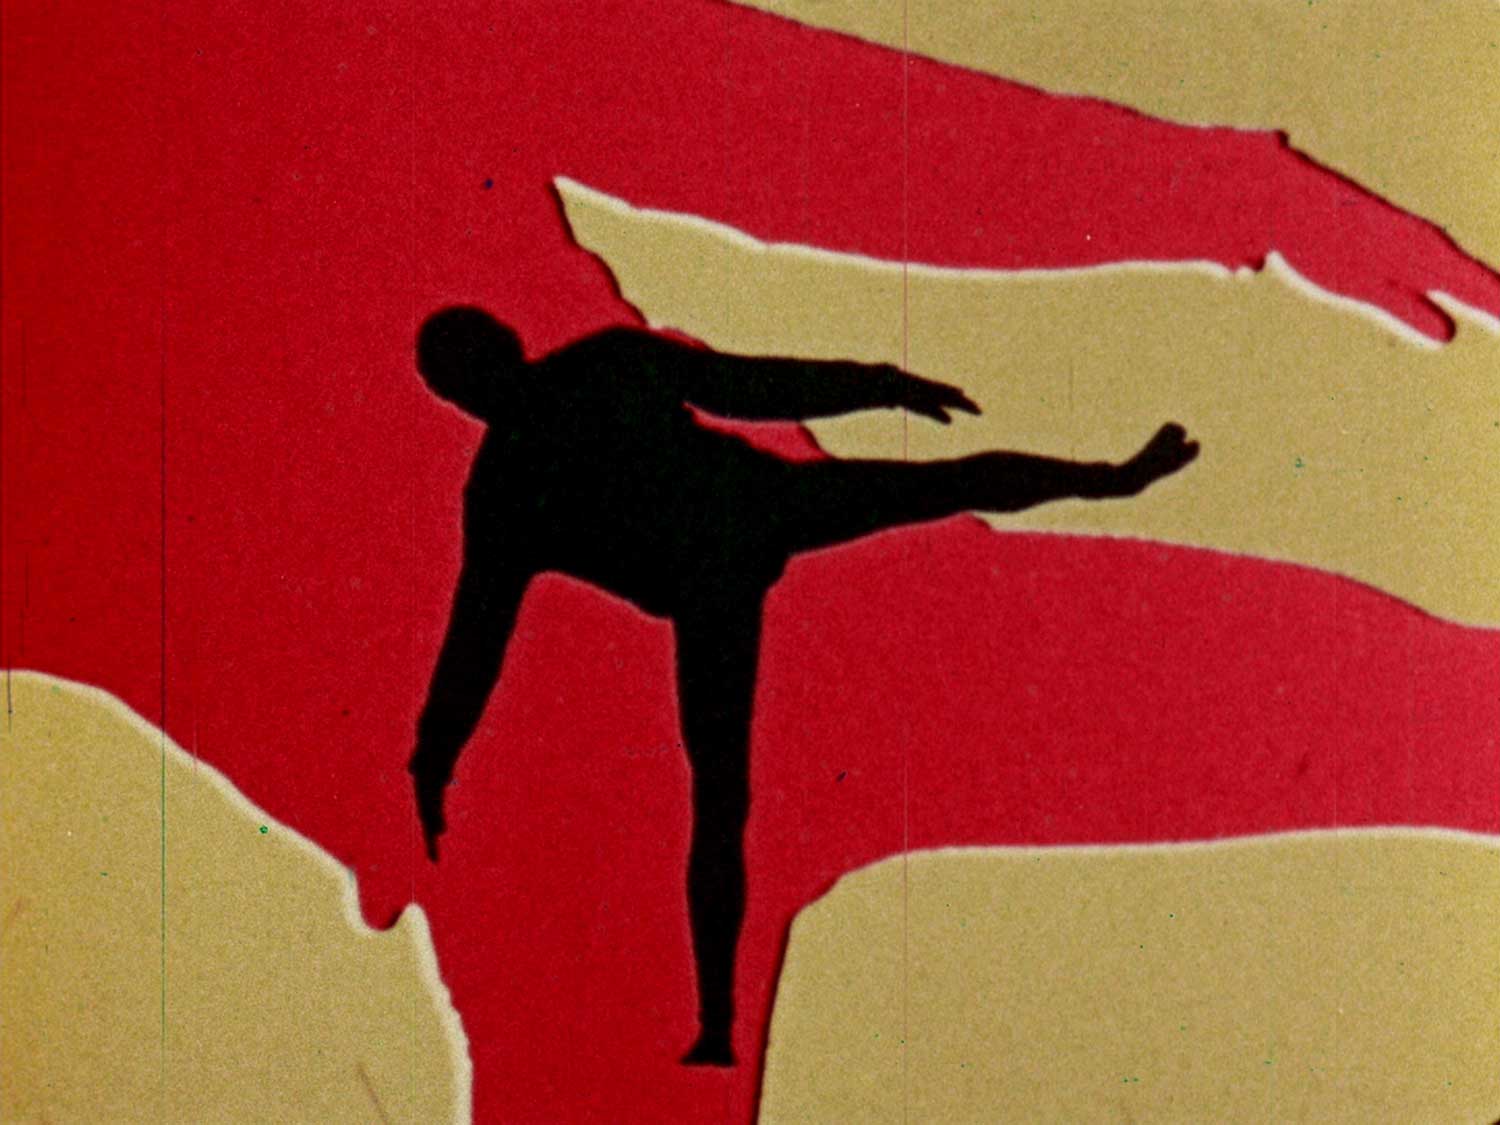 The silhouette of a human figure falling.